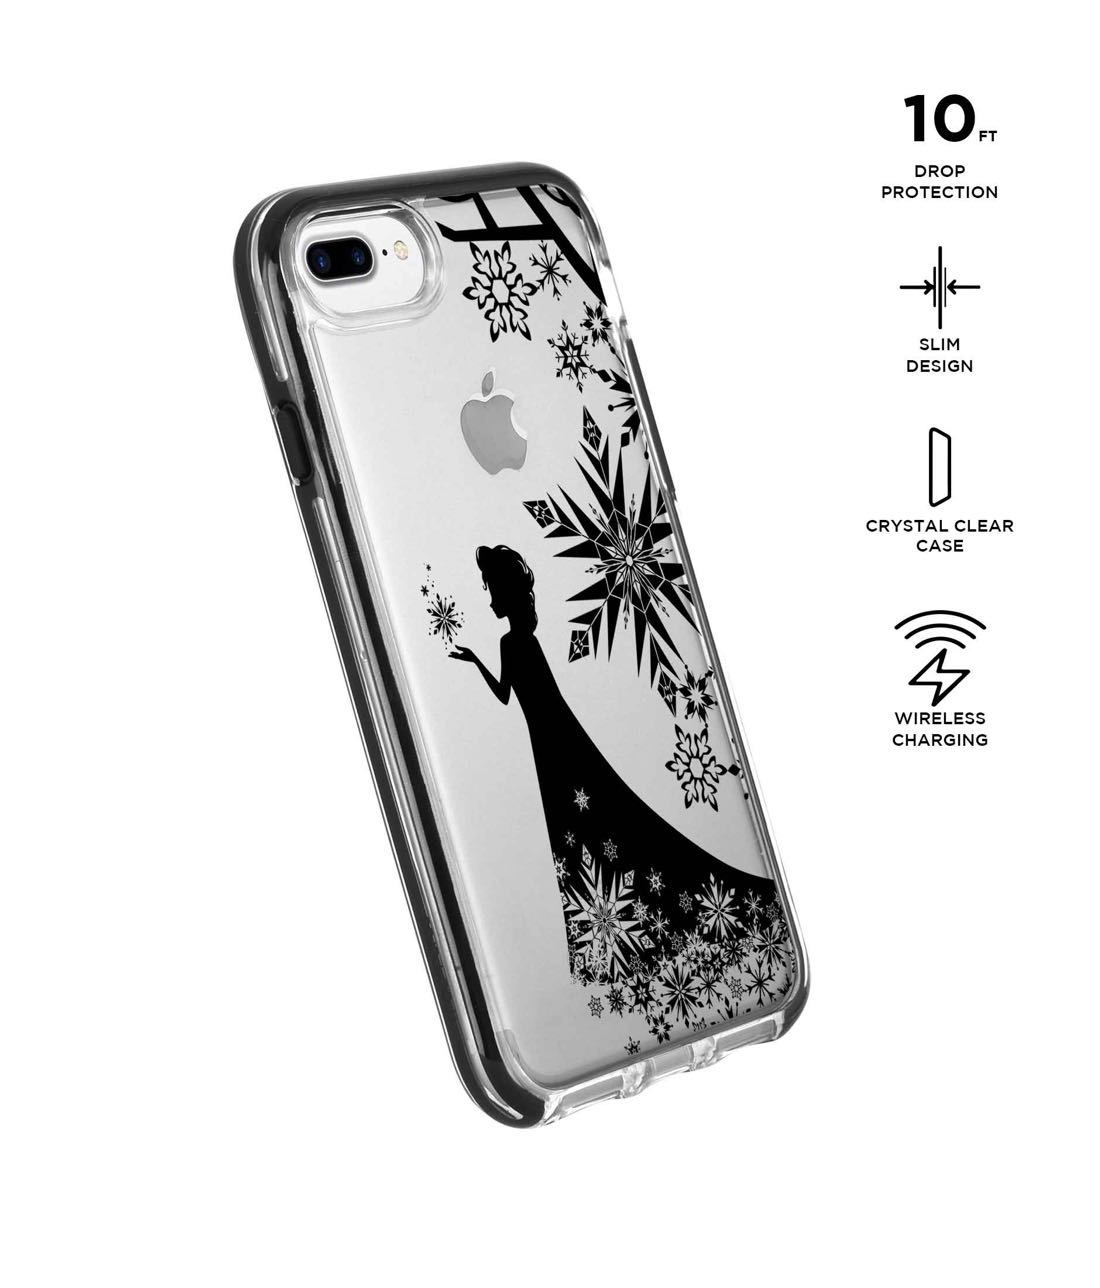 Elsa Silhouette - Extreme Phone Case for iPhone 7 Plus